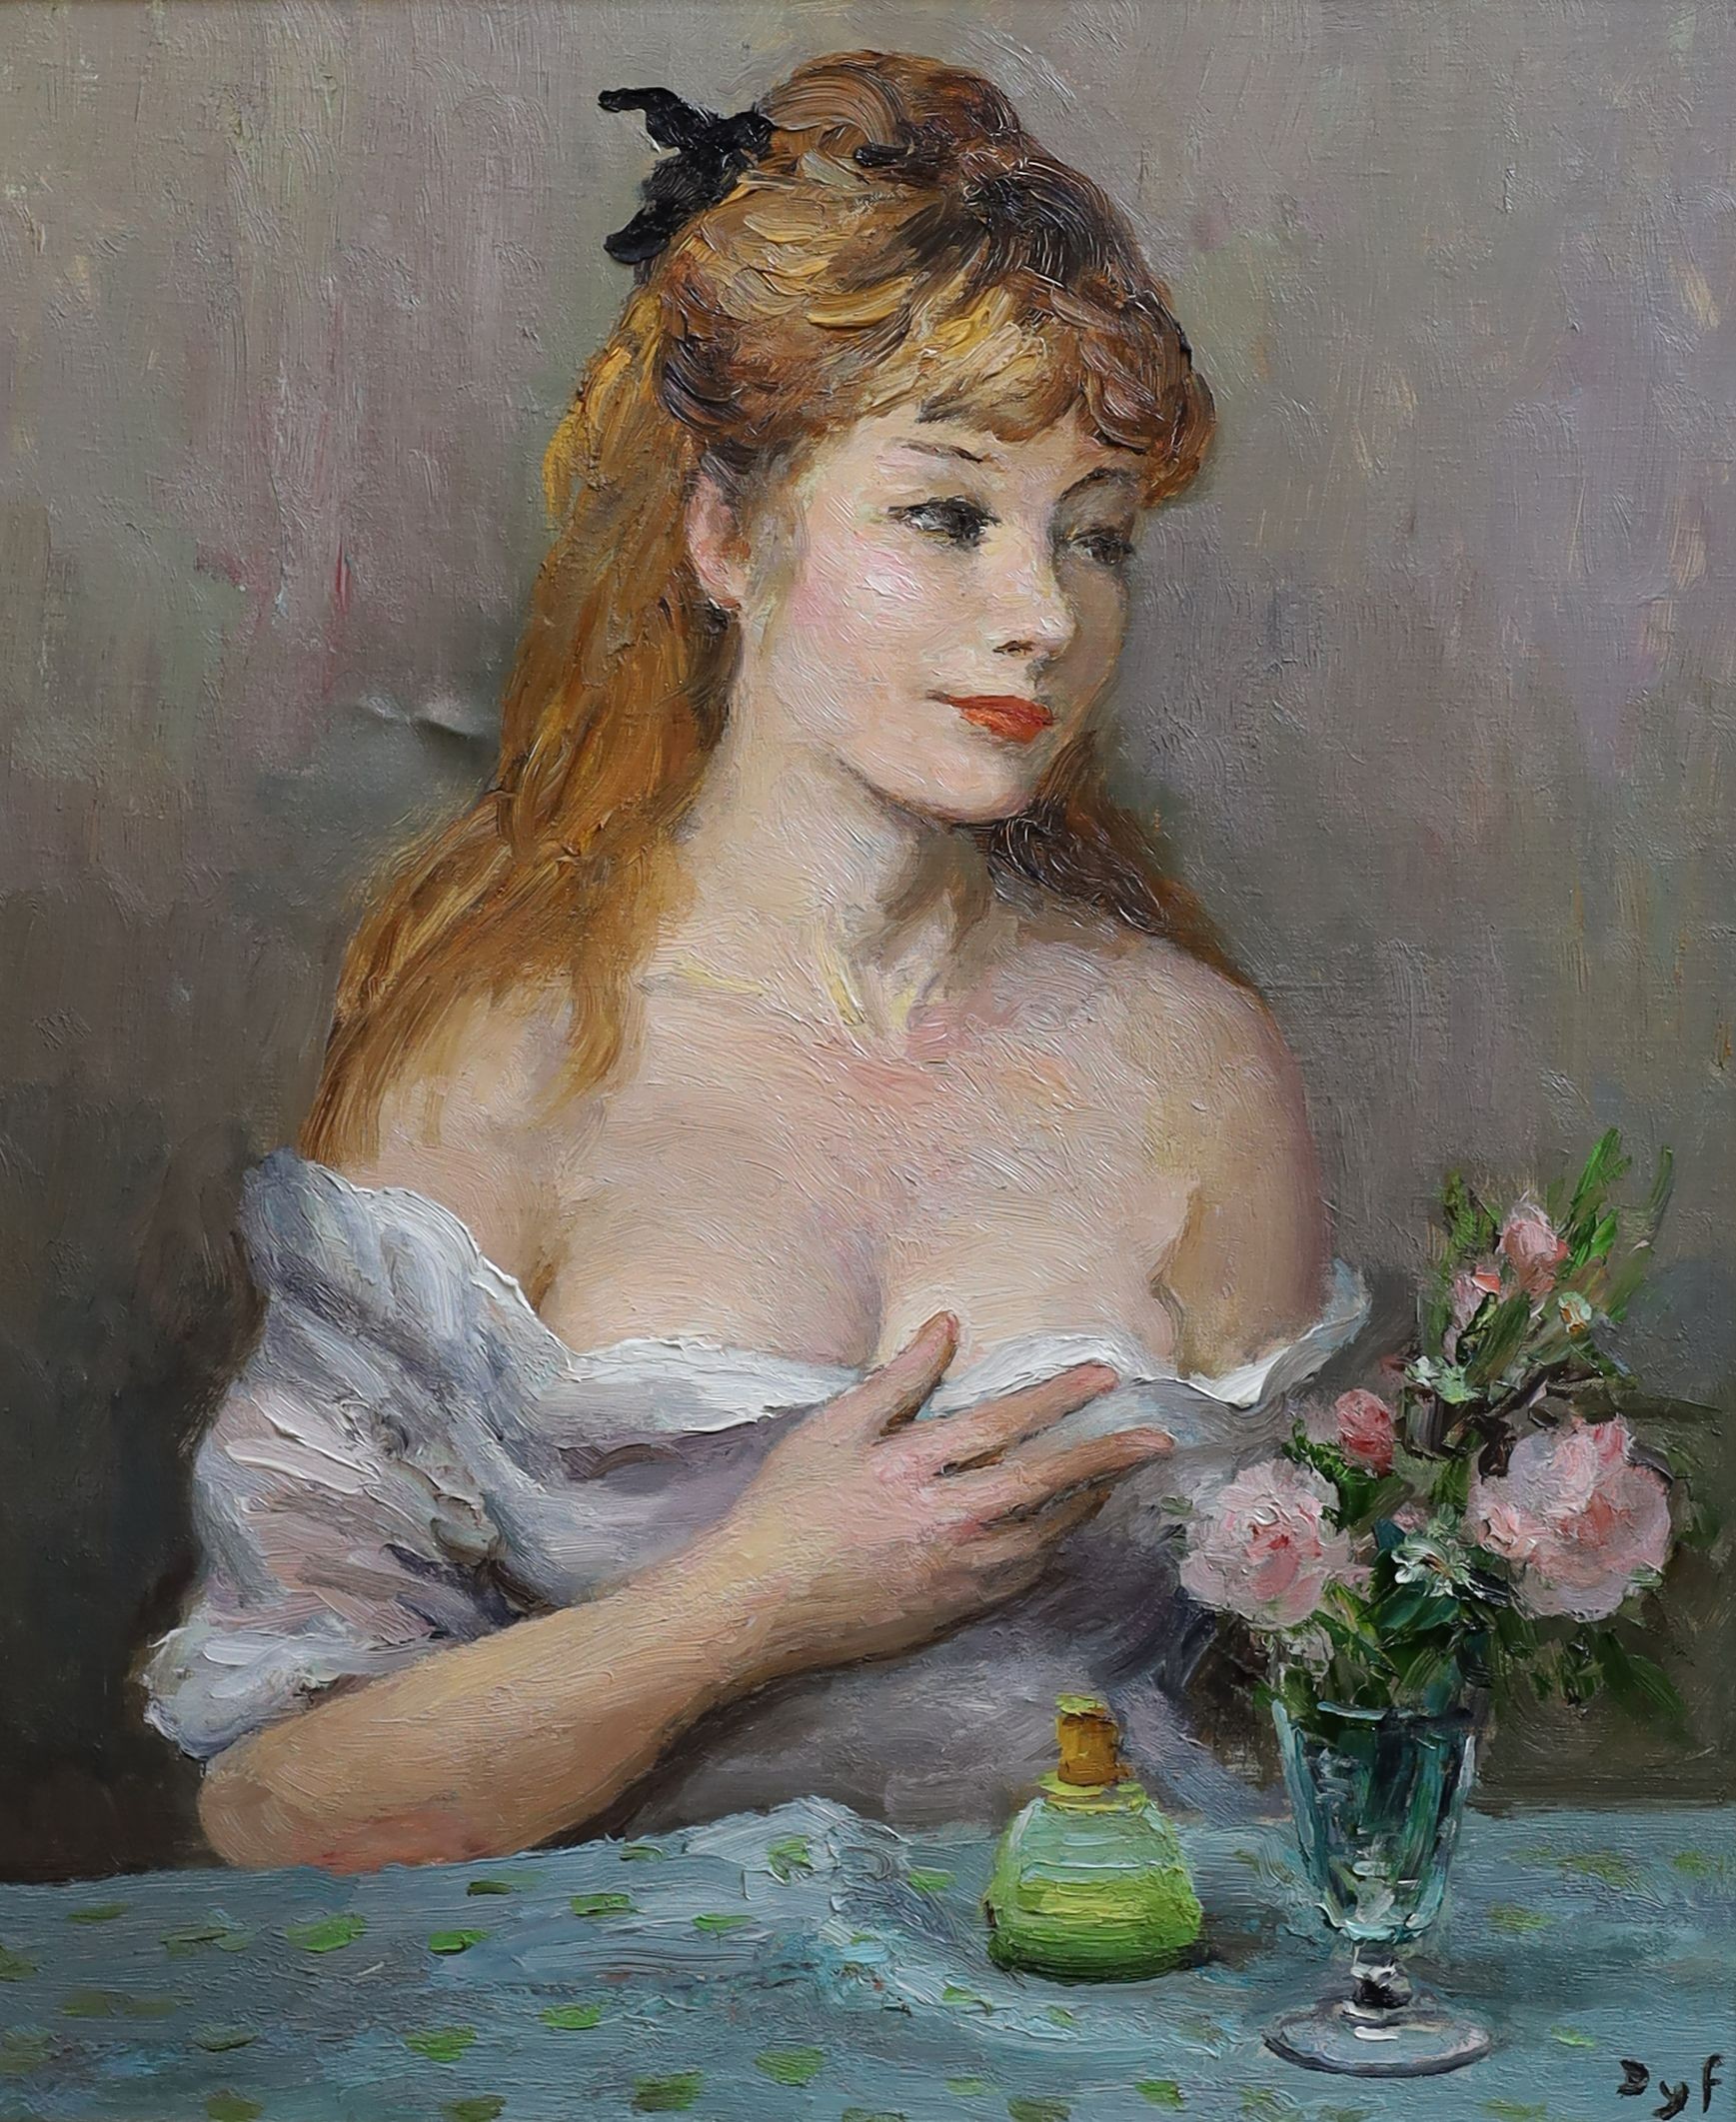 Marcel Dyf (French, 1899-1985), 'Claudine', oil on canvas, 54 x 44cm